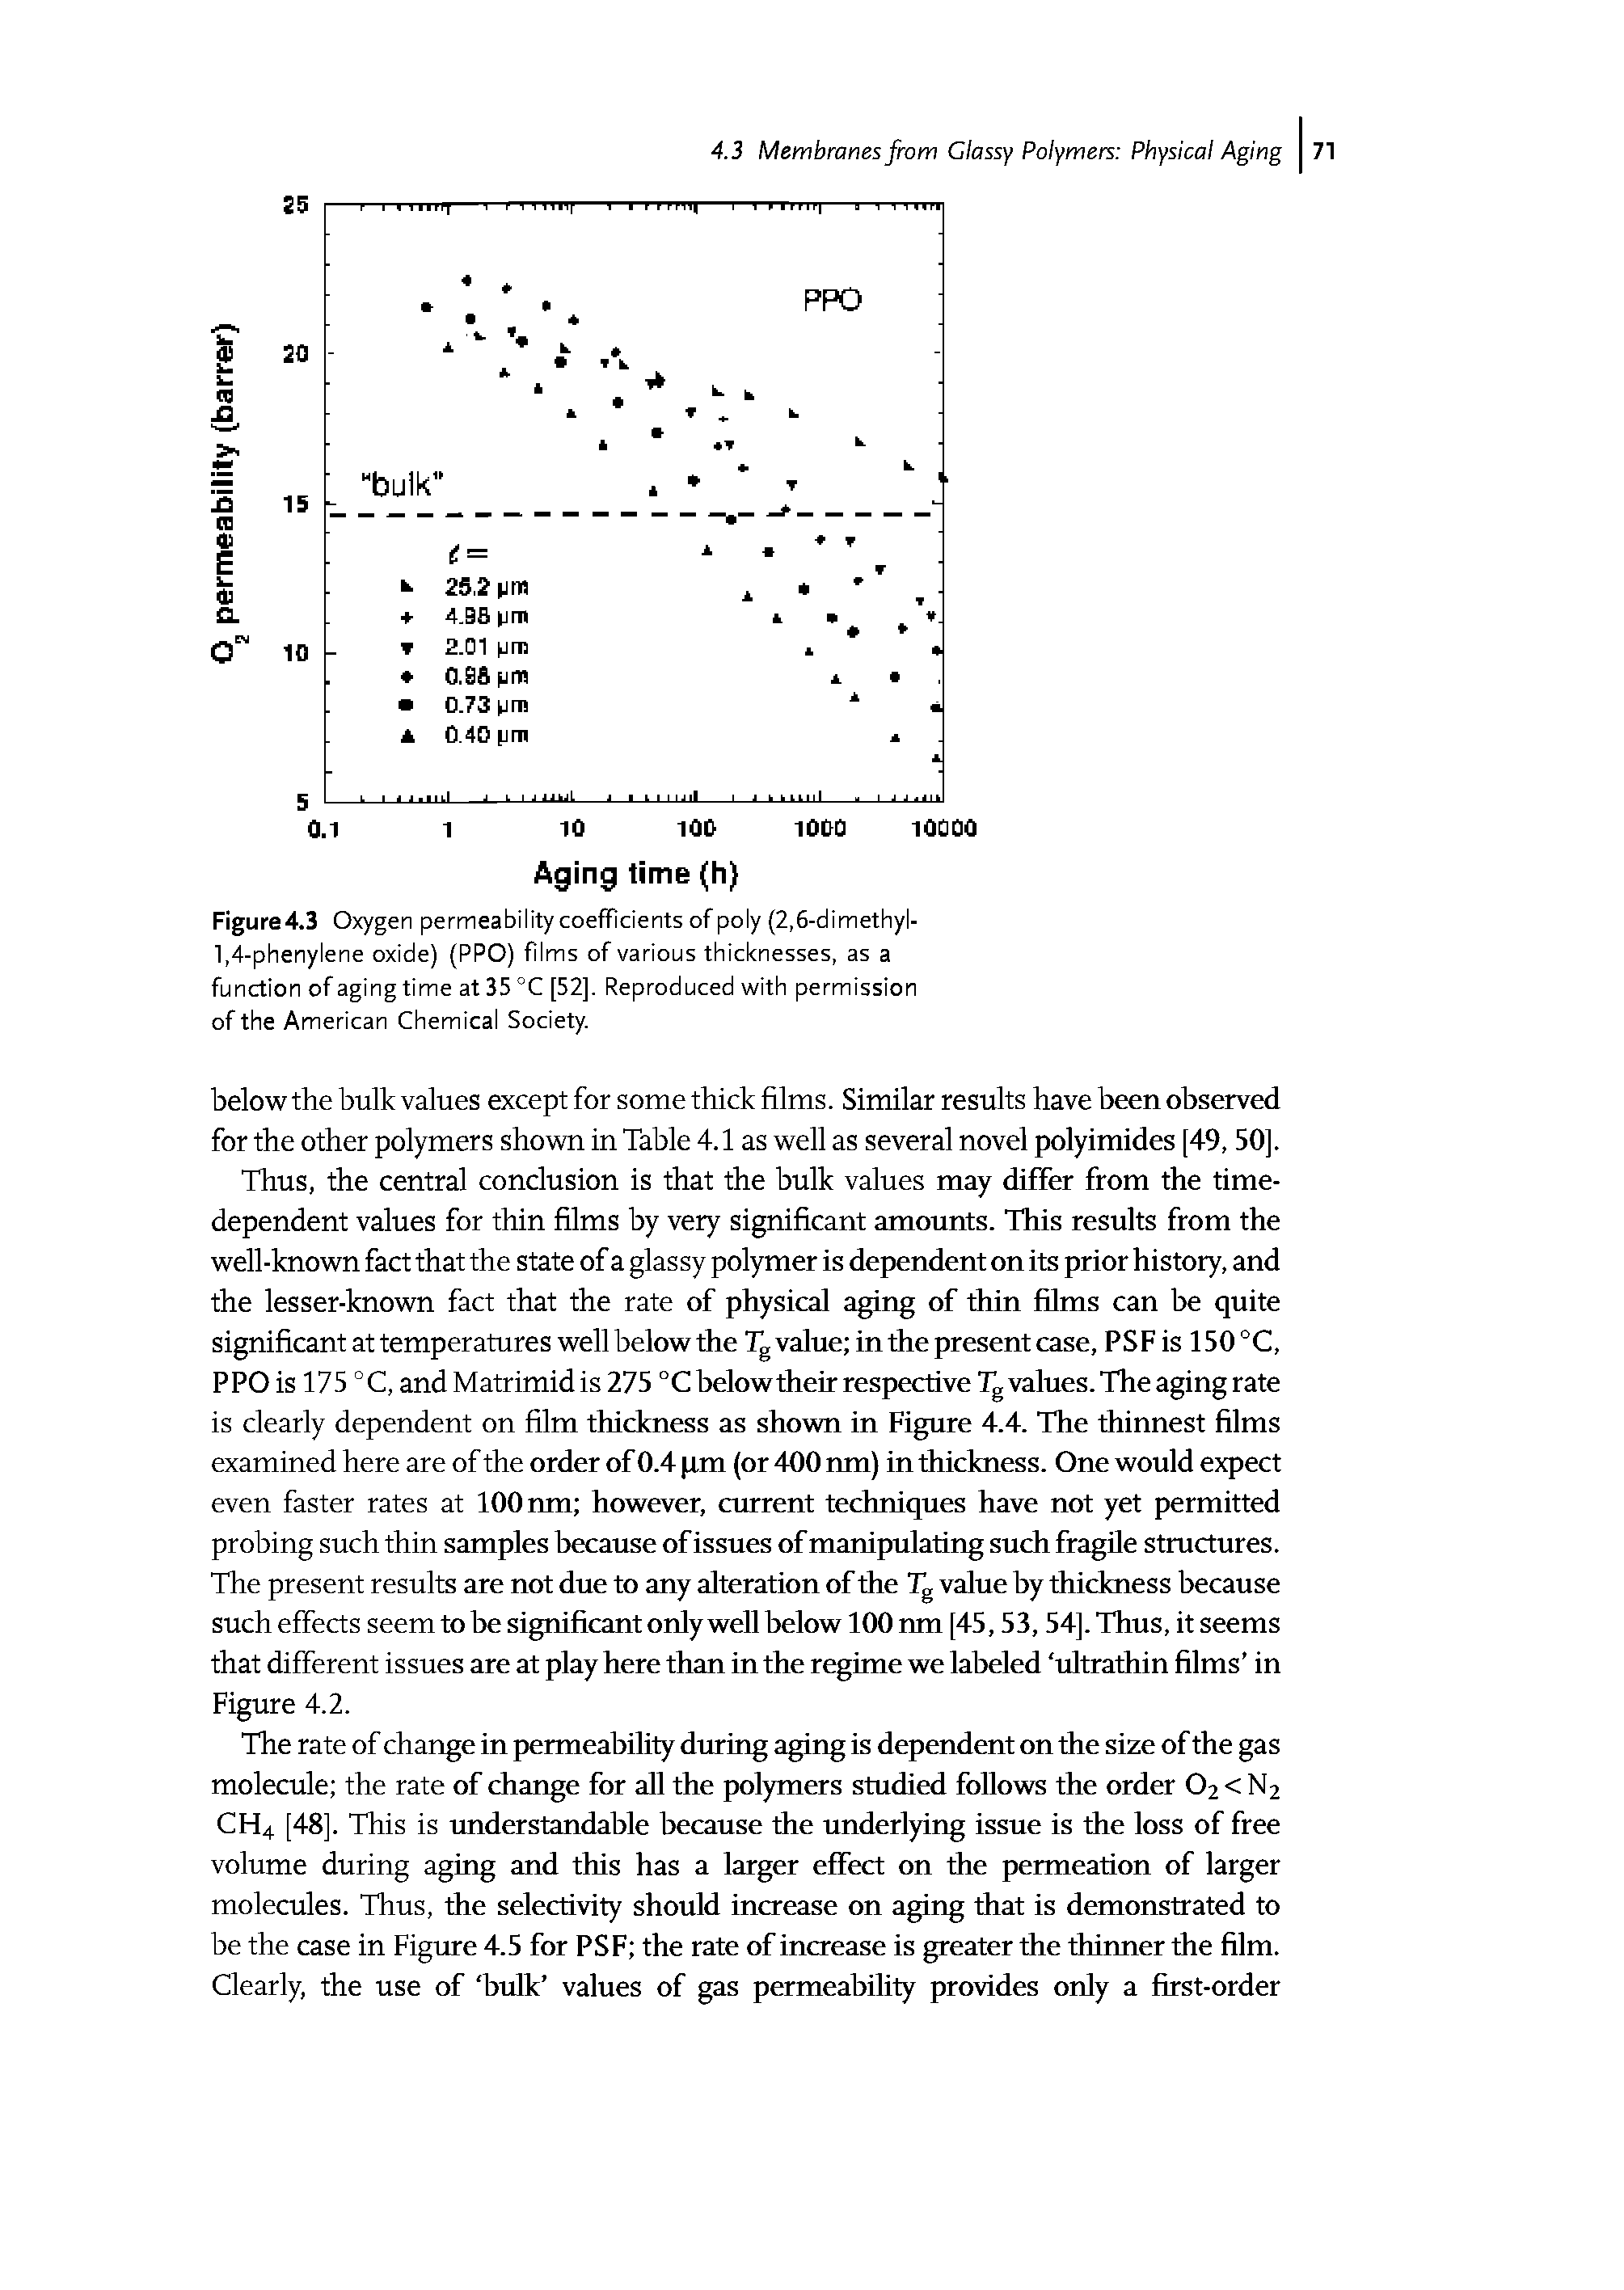 Figure4.3 Oxygen permeability coefficients of poly (2,6-dimethyl-1,4-phenylene oxide) (PPO) films of various thicknesses, as a function of aging time at 35 °C [52], Reproduced with permission of the American Chemical Society.